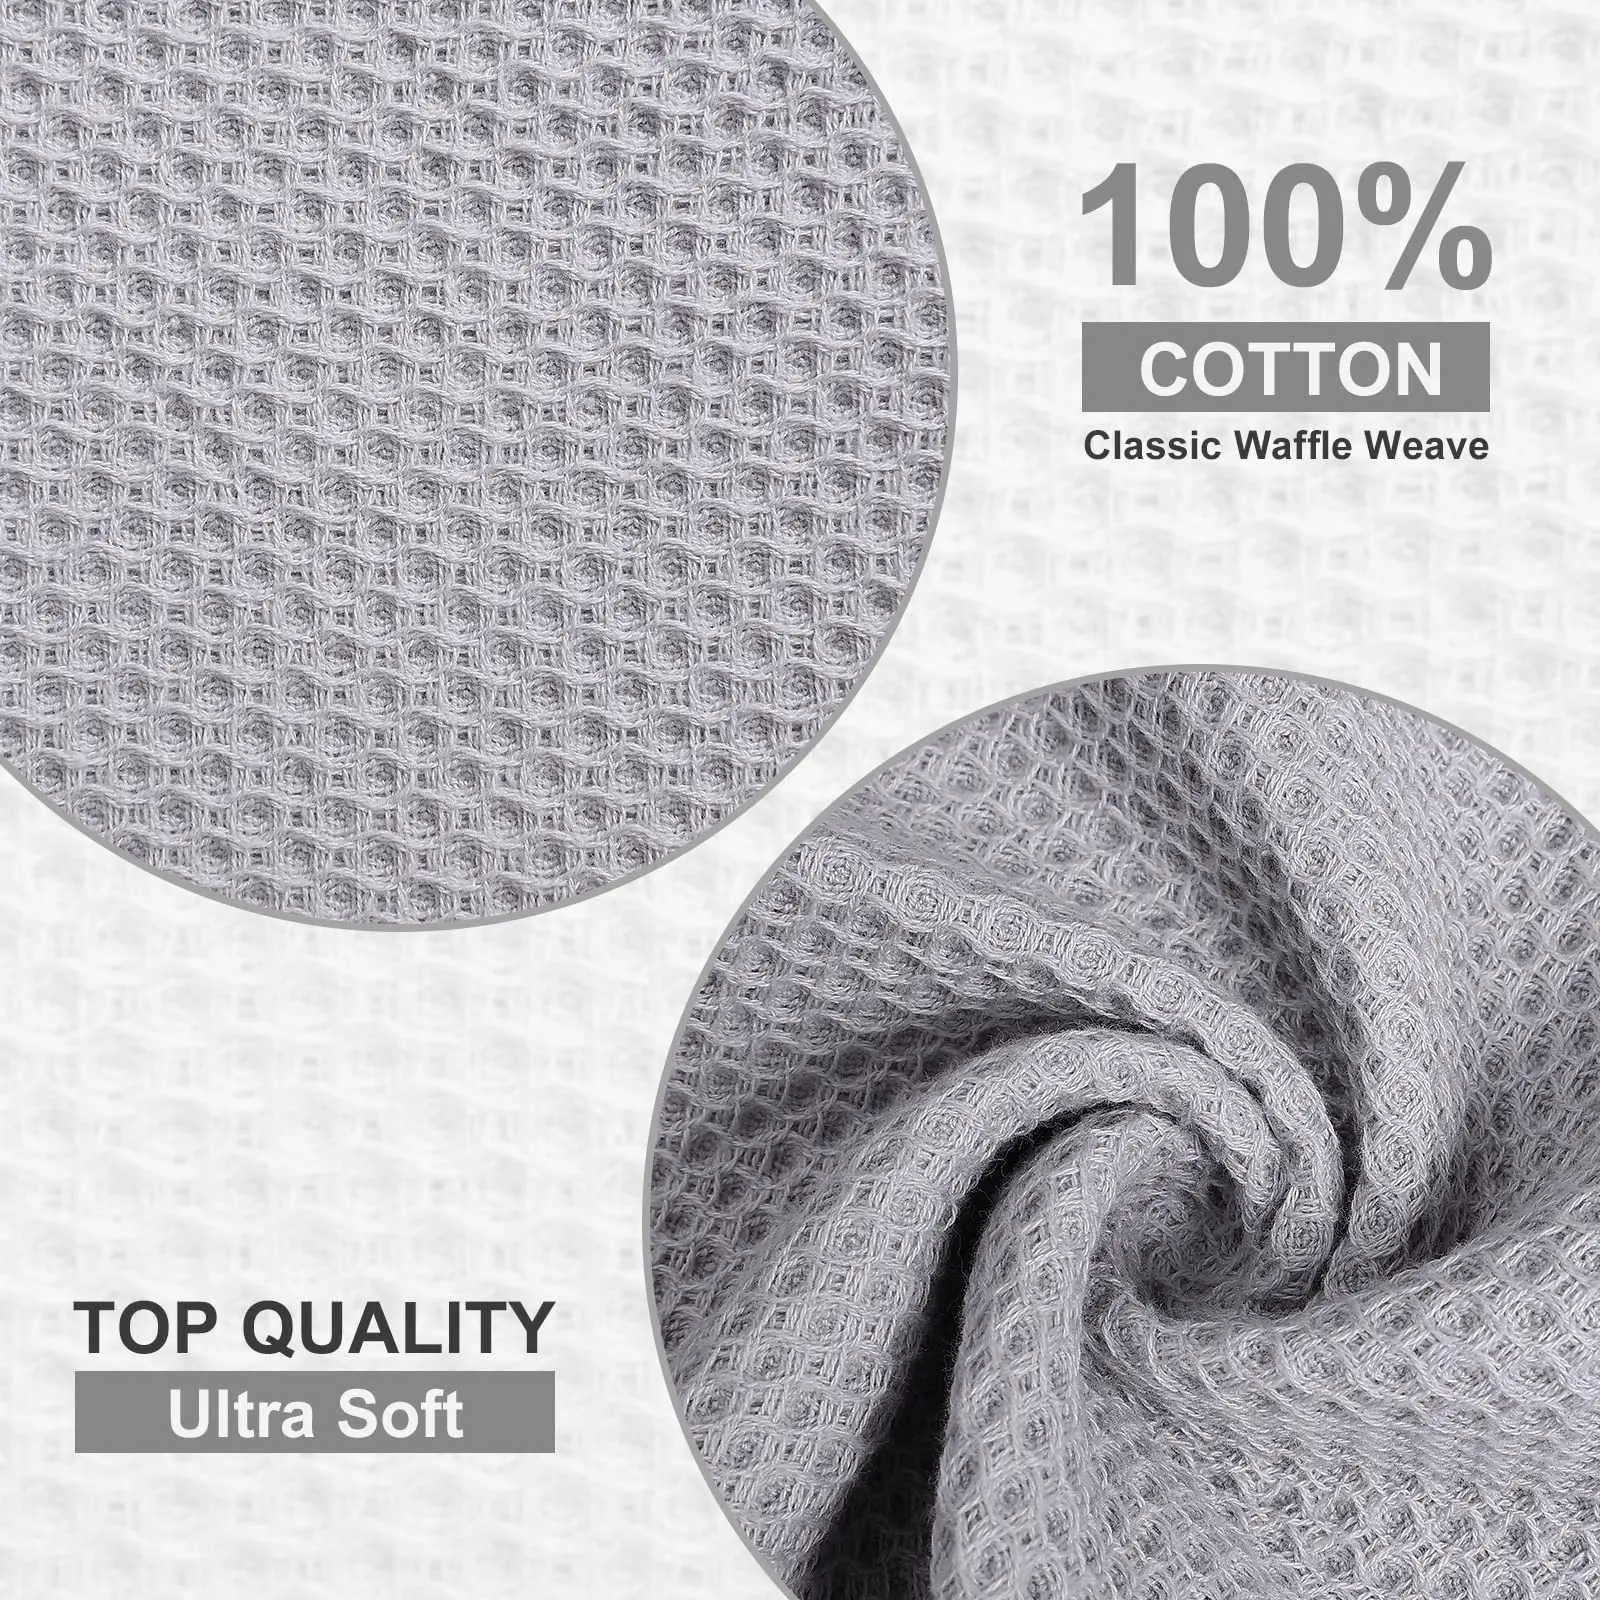 https://ae01.alicdn.com/kf/S6ed7f51318f941e5a62711b38249201fJ/Homaxy-100-Cotton-Dishcloth-Waffle-Weave-Hand-Towel-Soft-Absorbent-Kitchen-Dish-Cleaning-Cloth-Quick-Drying.jpg